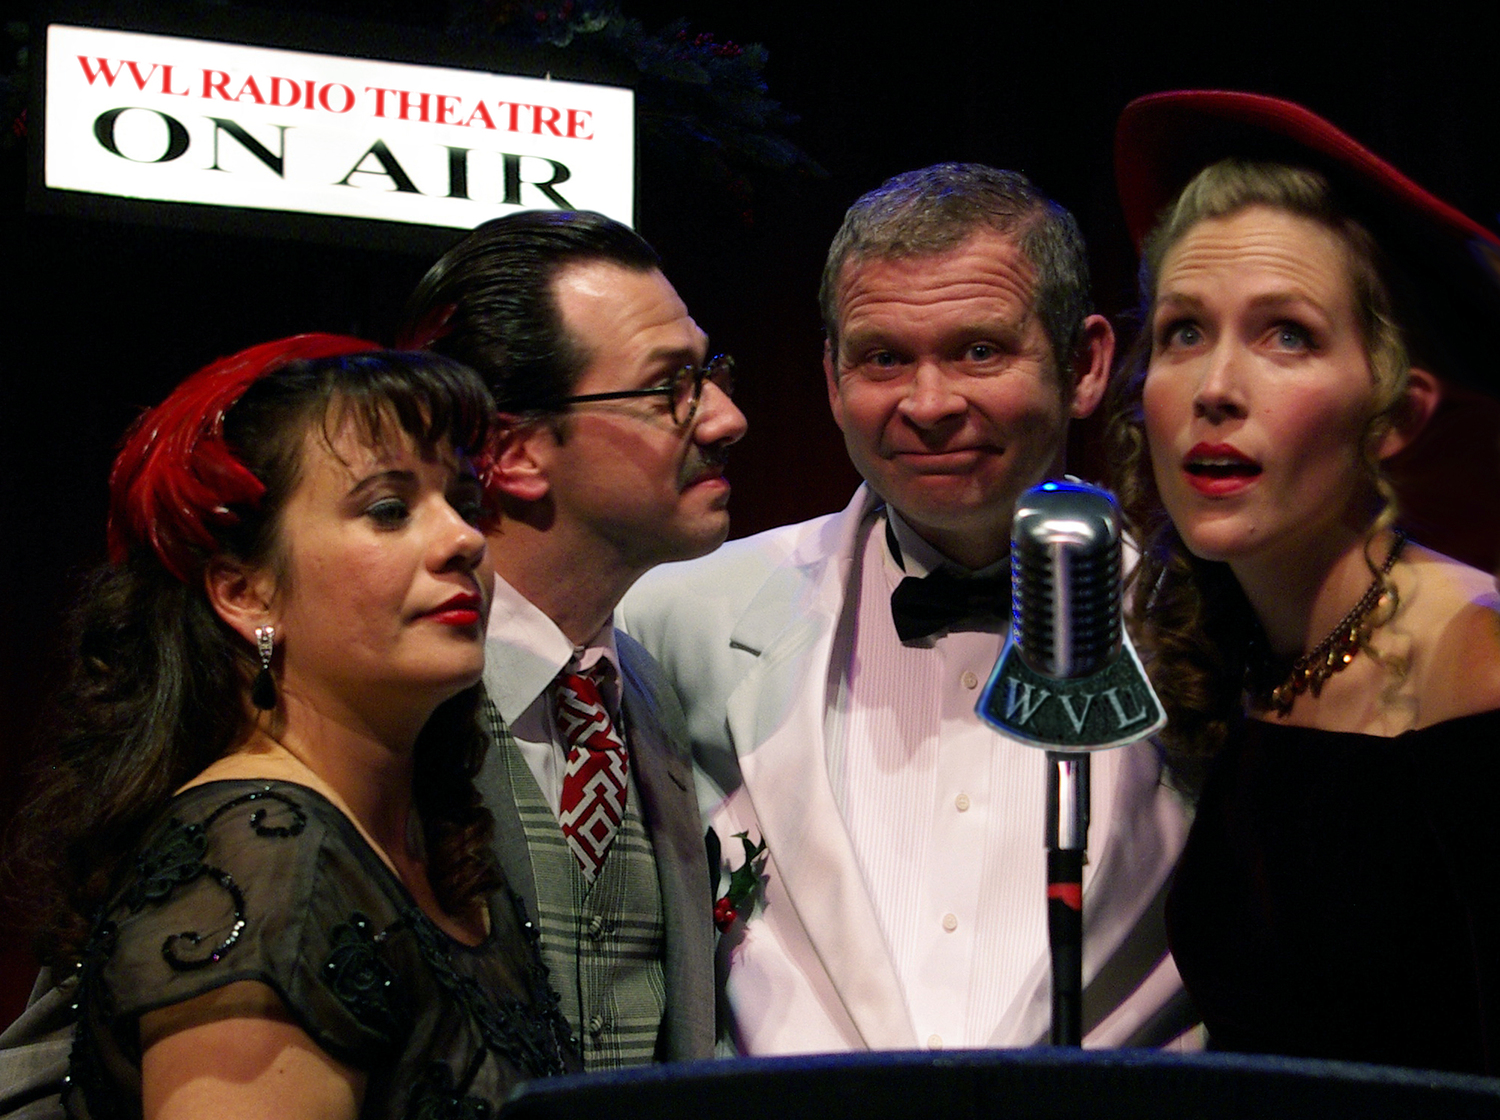 Review: IT'S A WONDERFUL LIFE: LIVE FROM WVL RADIO THEATRE at IUS The Ogle Center 